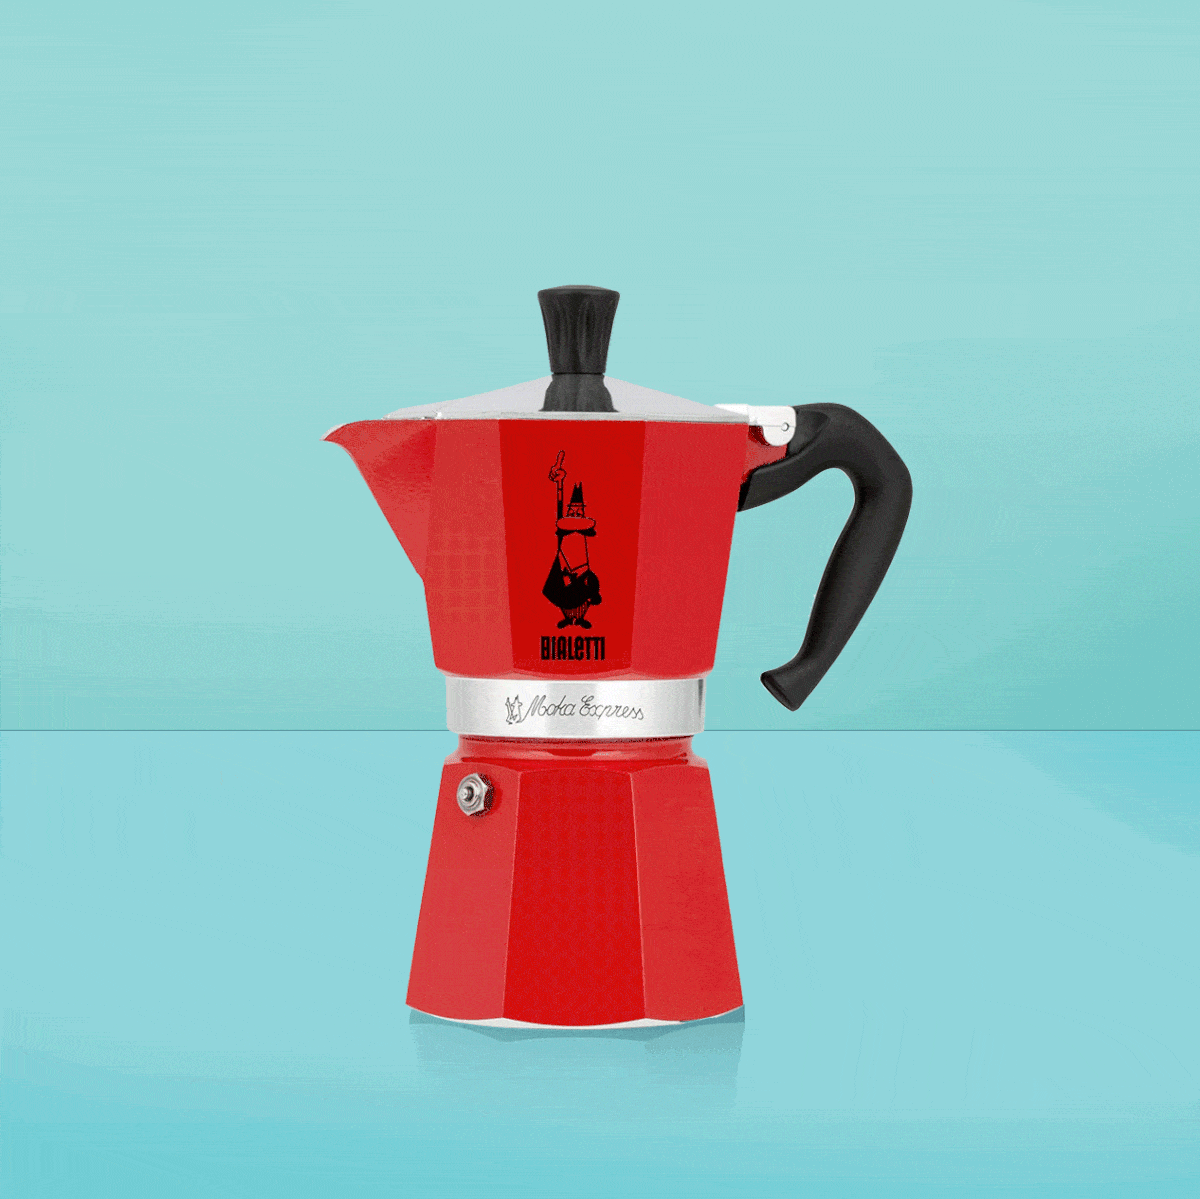 https://hips.hearstapps.com/hmg-prod/images/gh-040120-ghi-types-of-coffee-makers-1589213502.gif?crop=0.633xw:0.973xh;0.196xw,0.0197xh&resize=1200:*